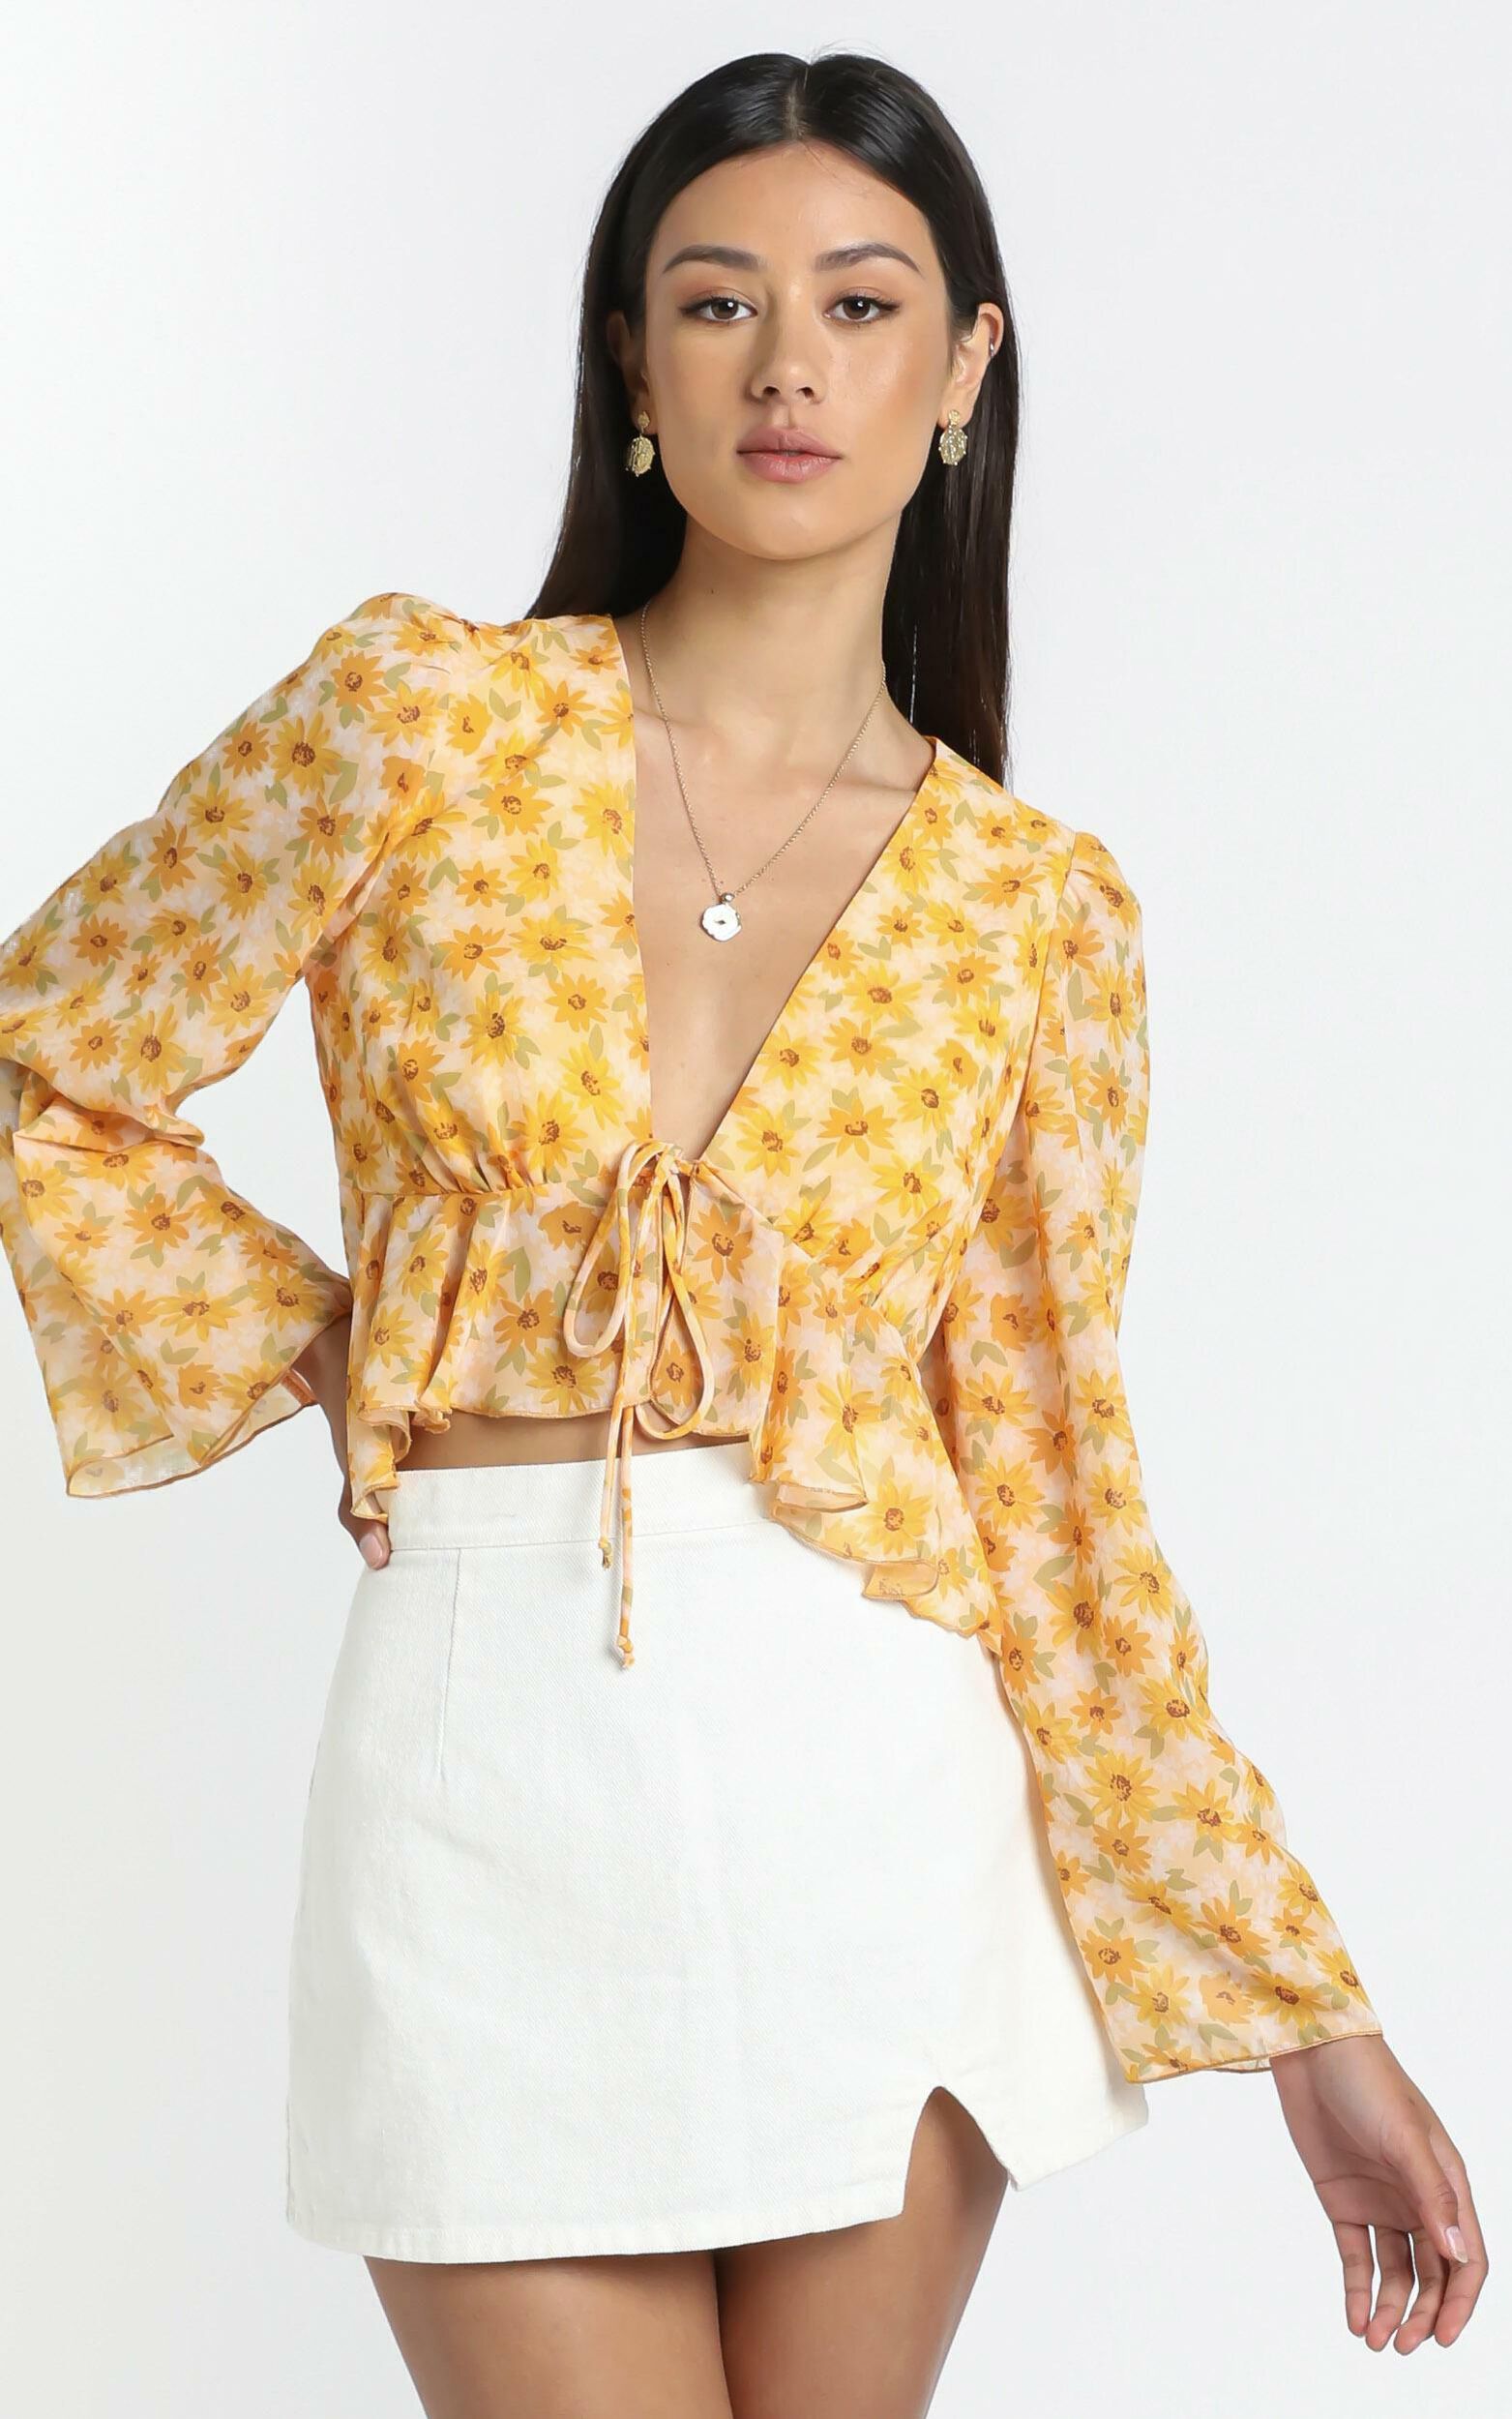 Dance It Out Top in Sunflower - 12 (L), Yellow